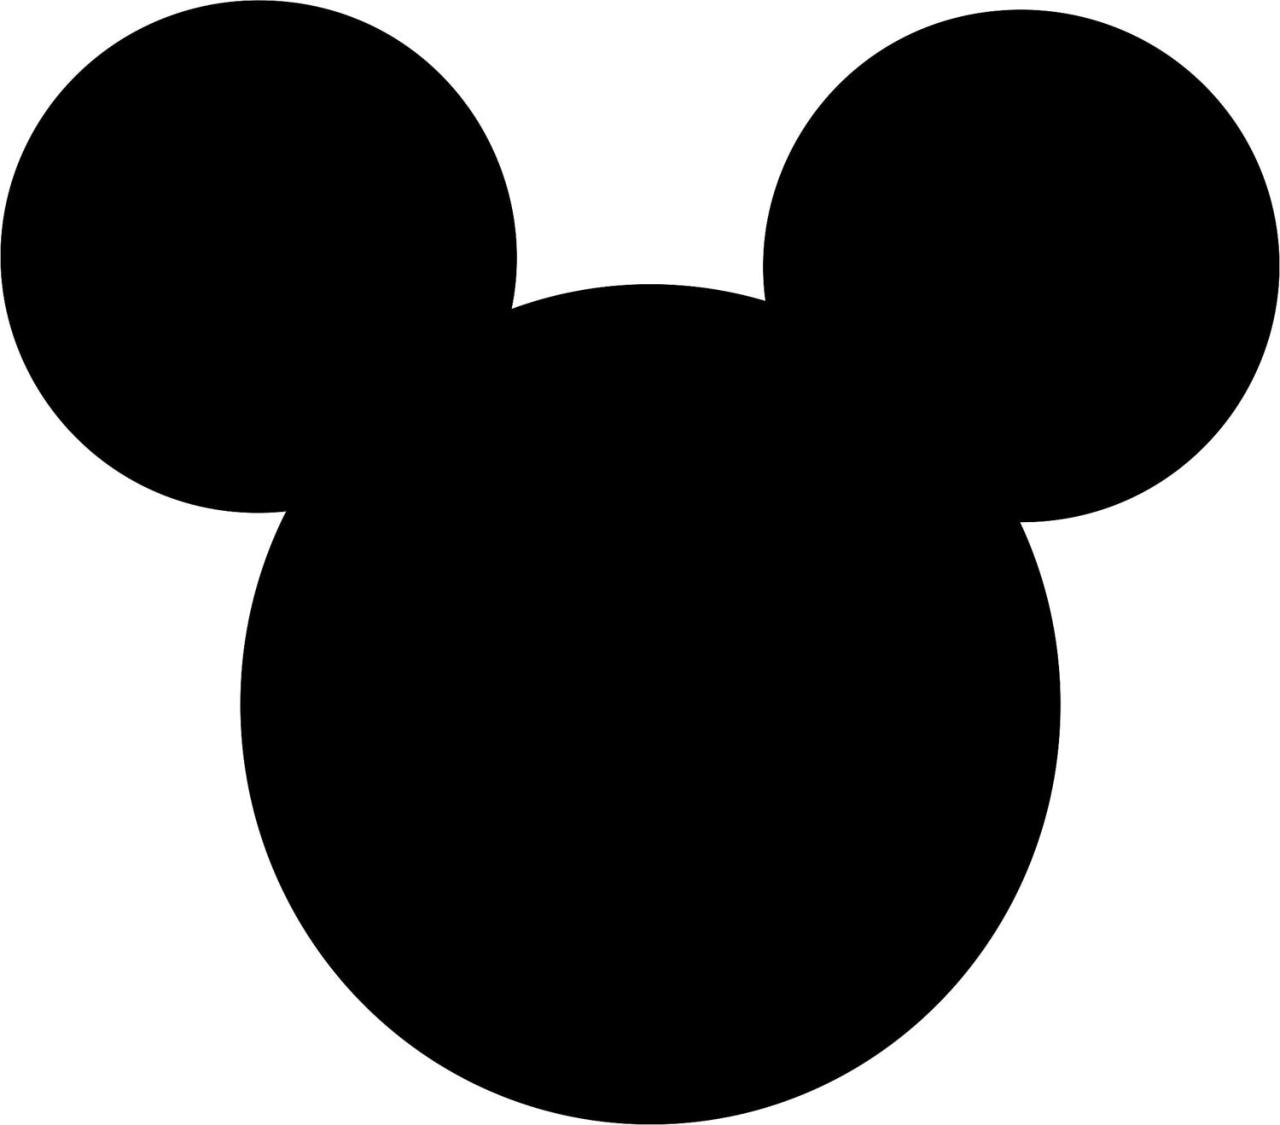 Mickey Mouse SVG